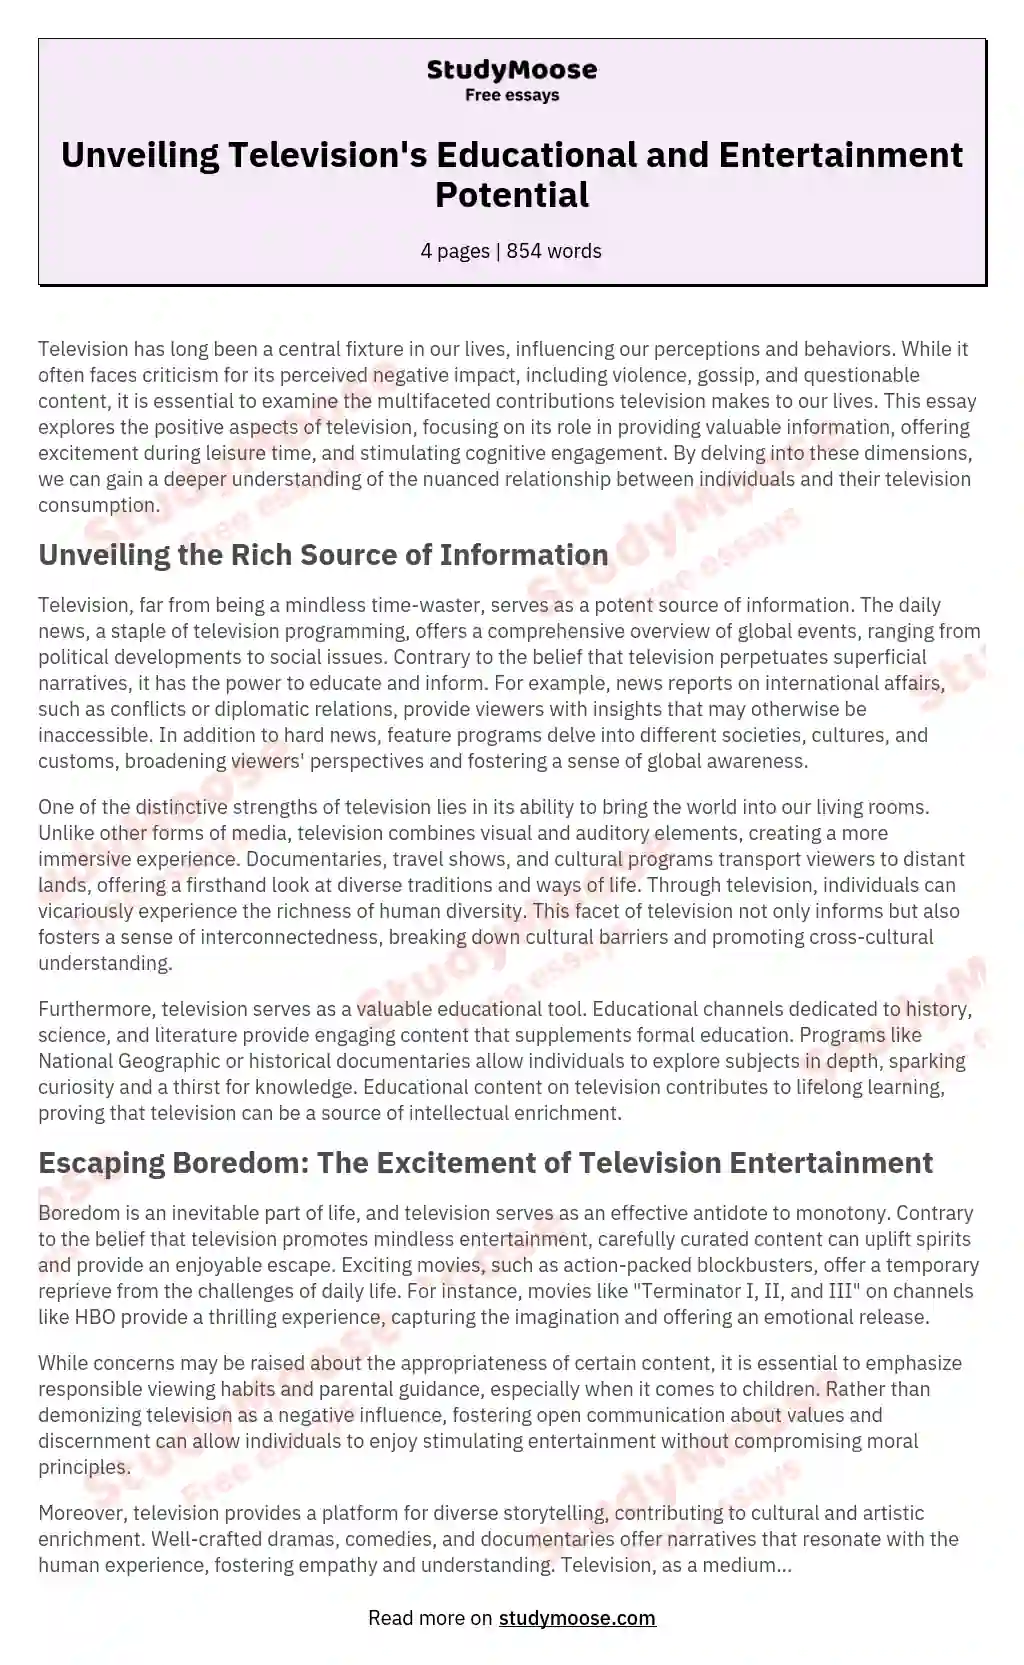 Unveiling Television's Educational and Entertainment Potential essay